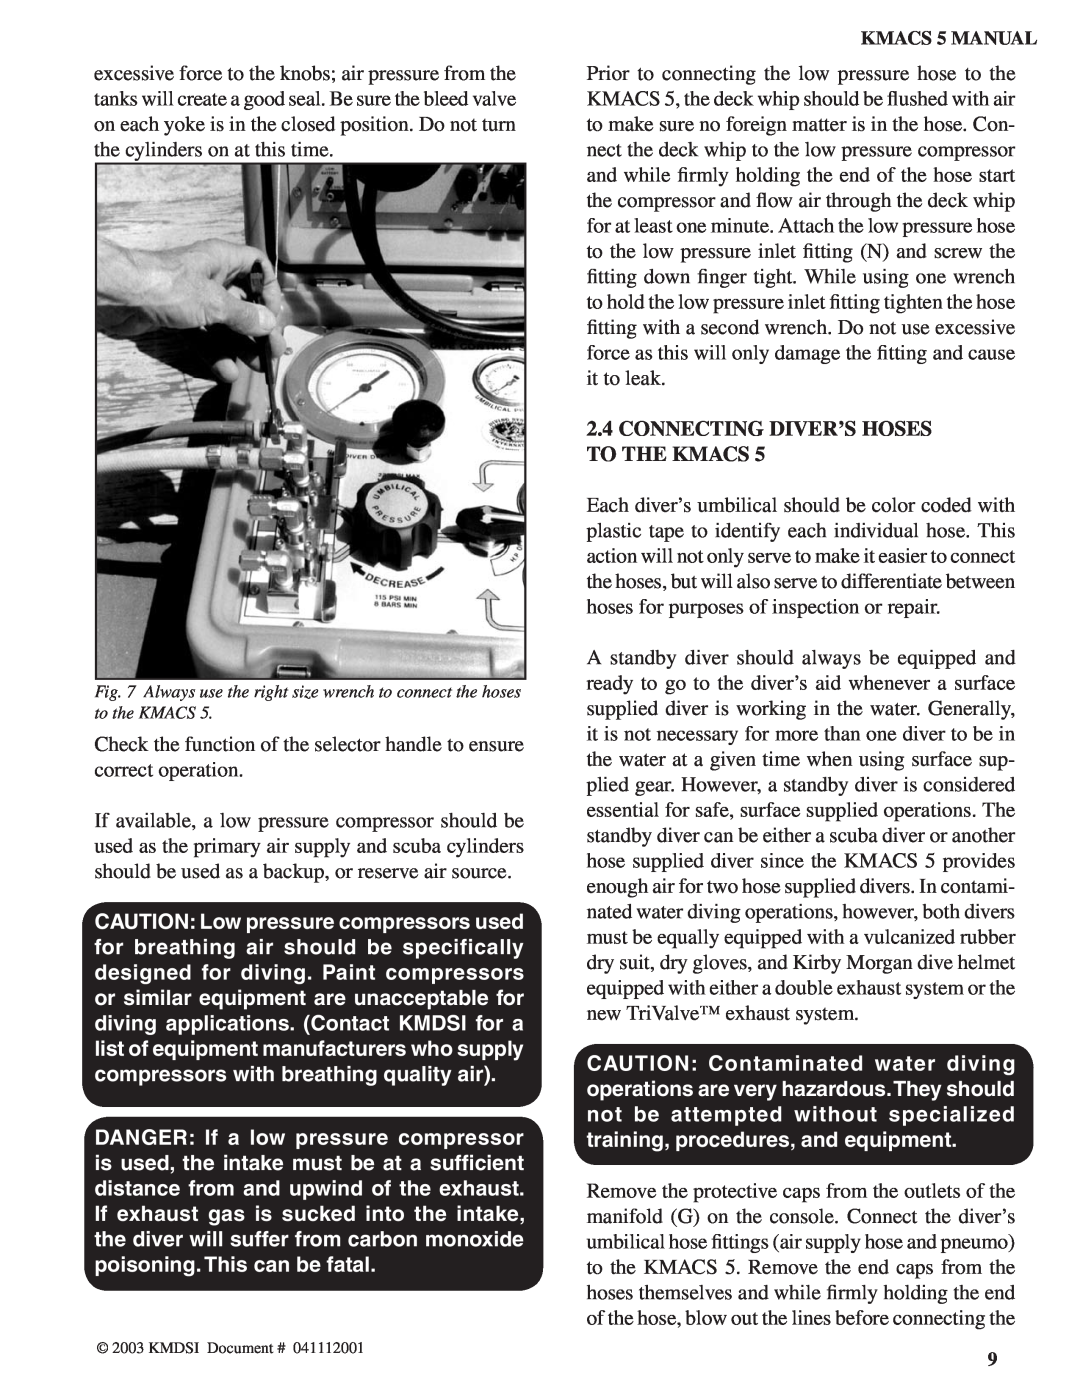 Kirby 5, Air Control System manual 2.4CONNECTING DIVER’S HOSES TO THE KMACS 